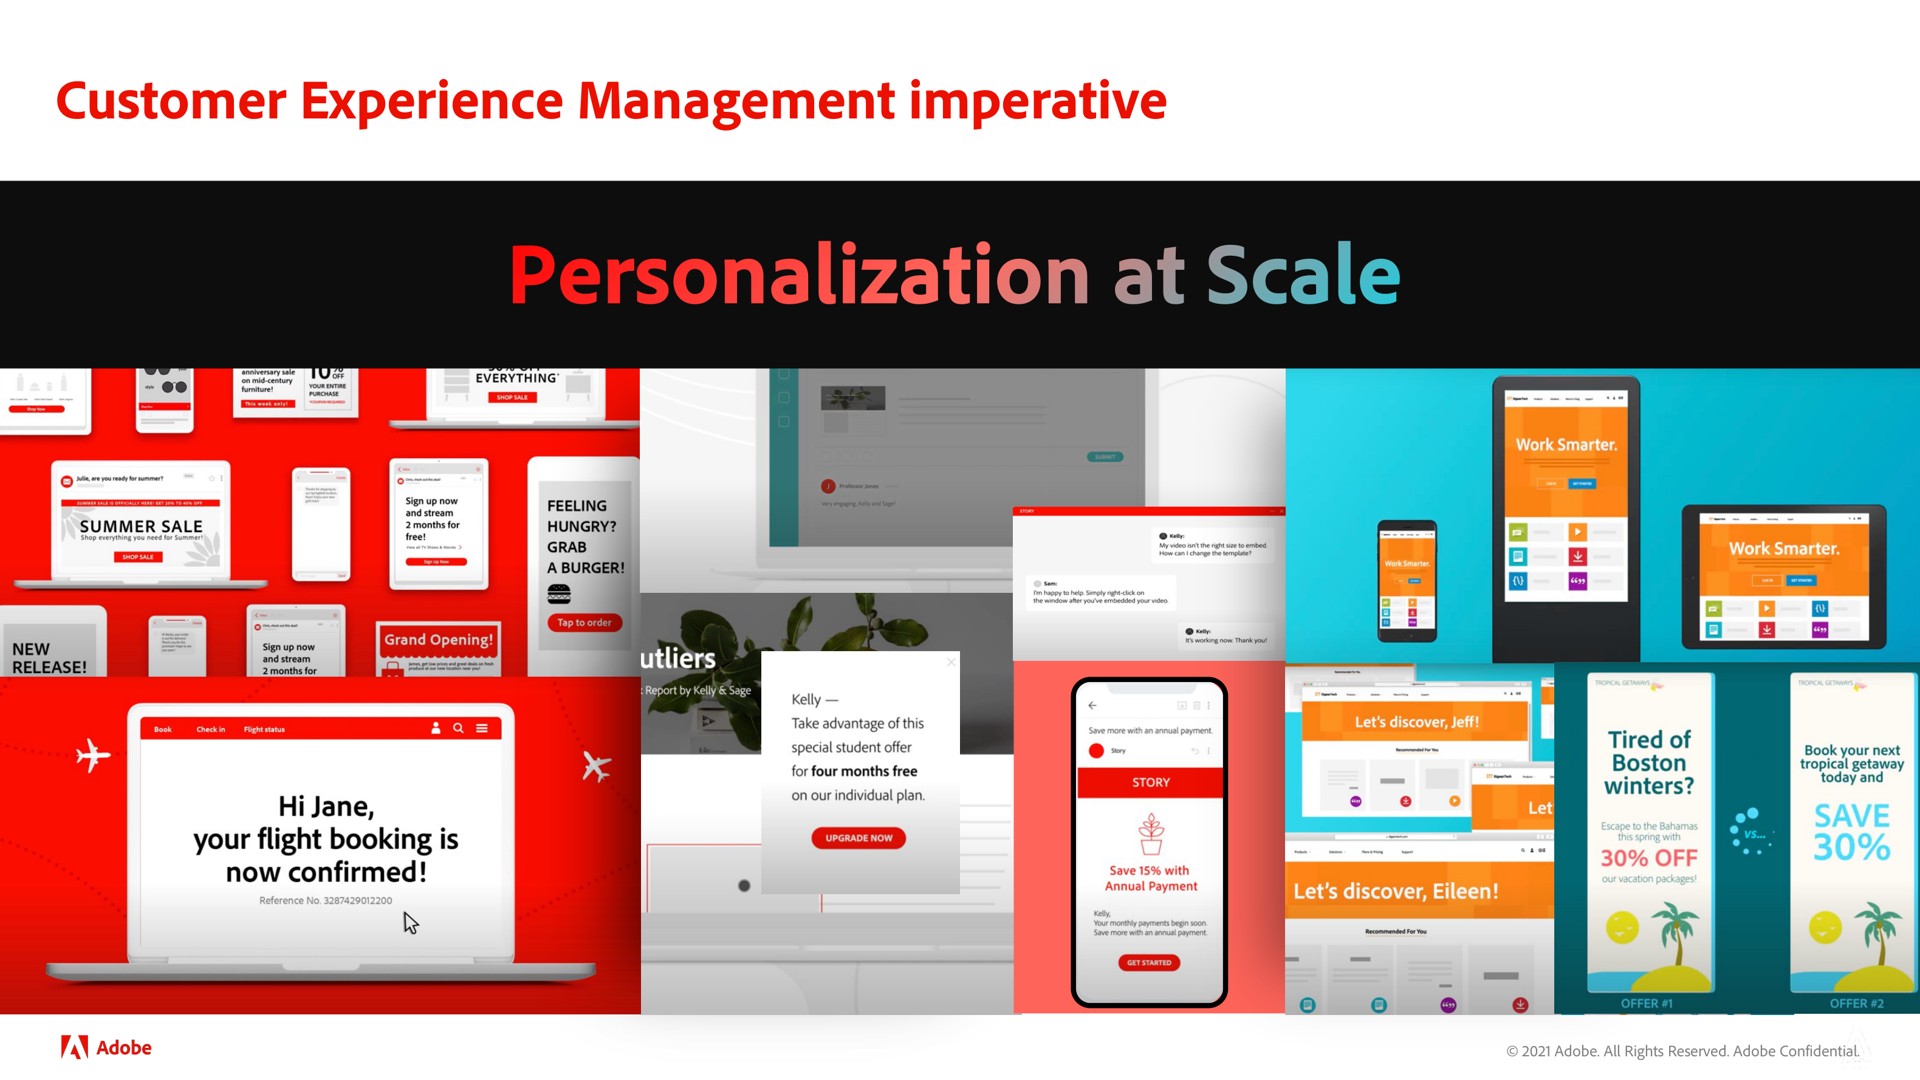 customer experience management imperative at scale | Adobe